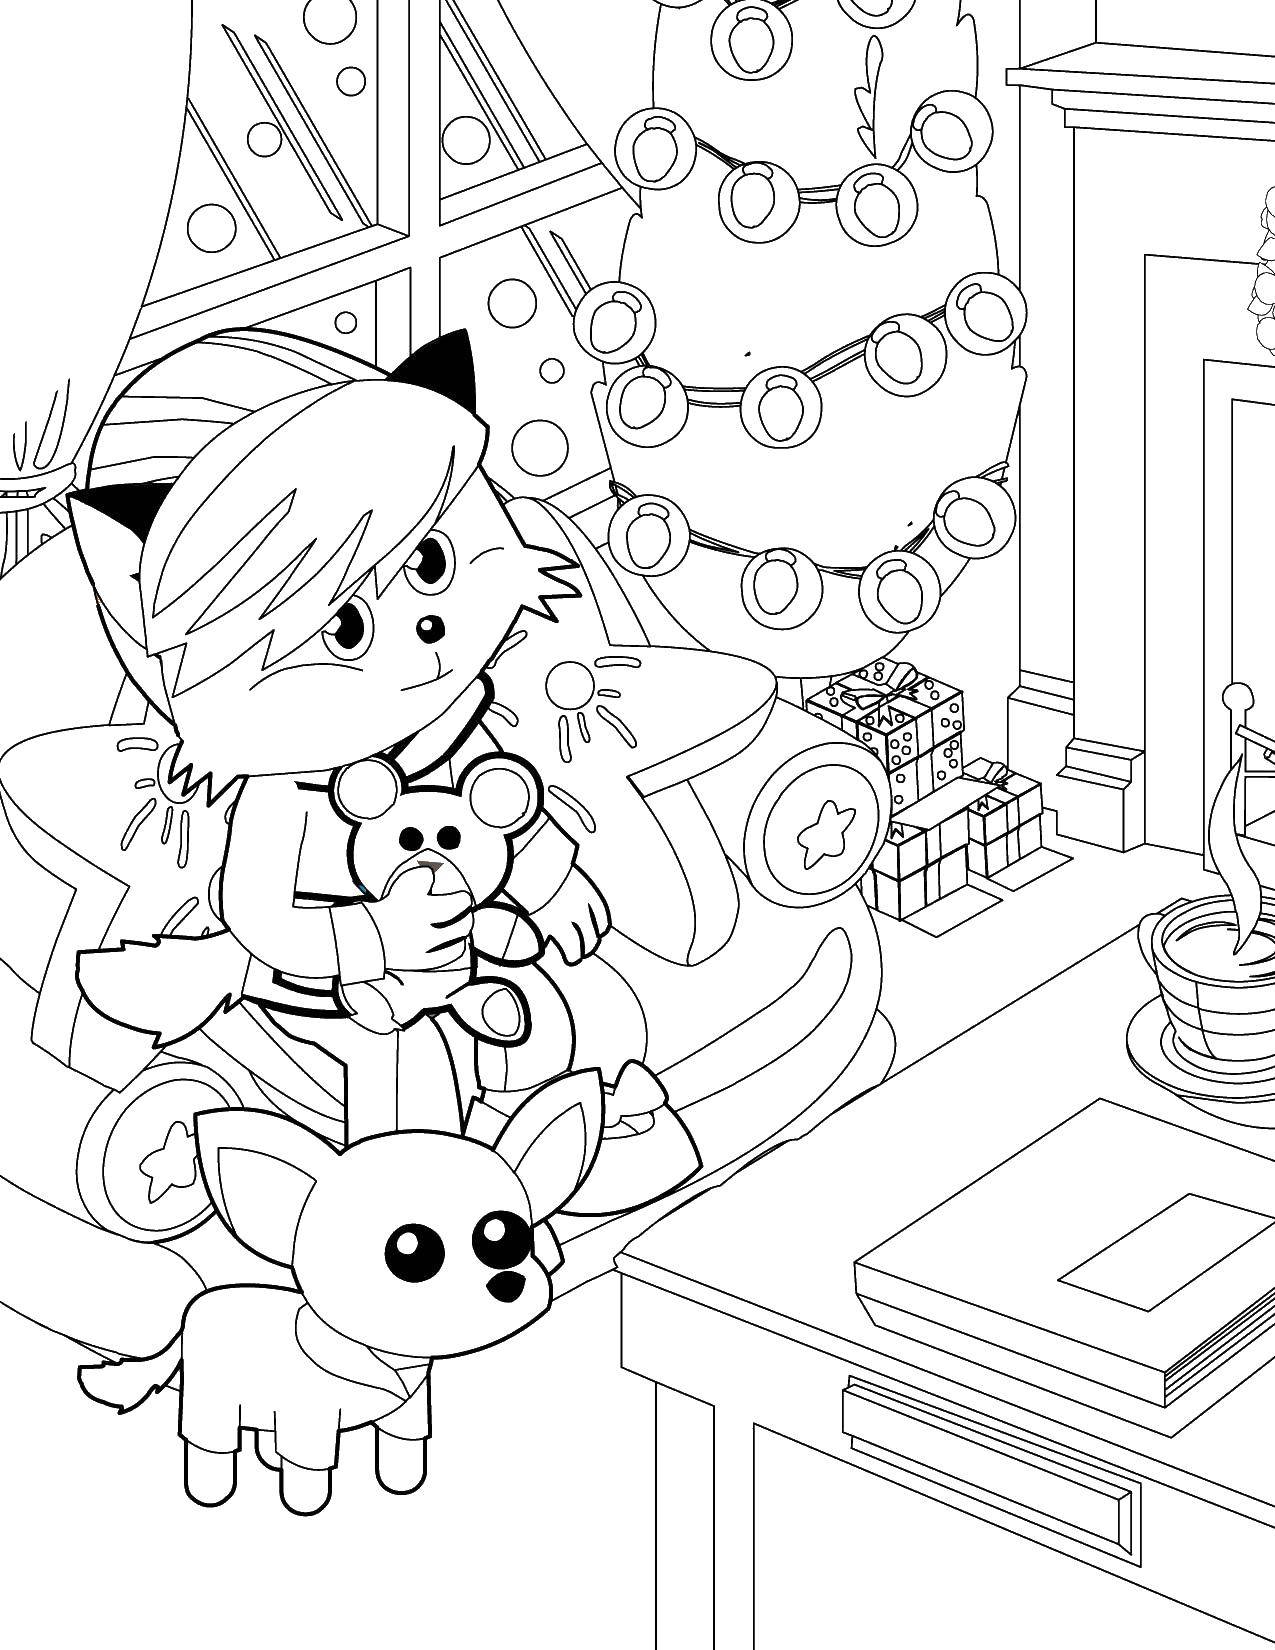 Coloring Kitty at the Christmas tree. Category Christmas. Tags:  Christmas, tree, New year, cat.